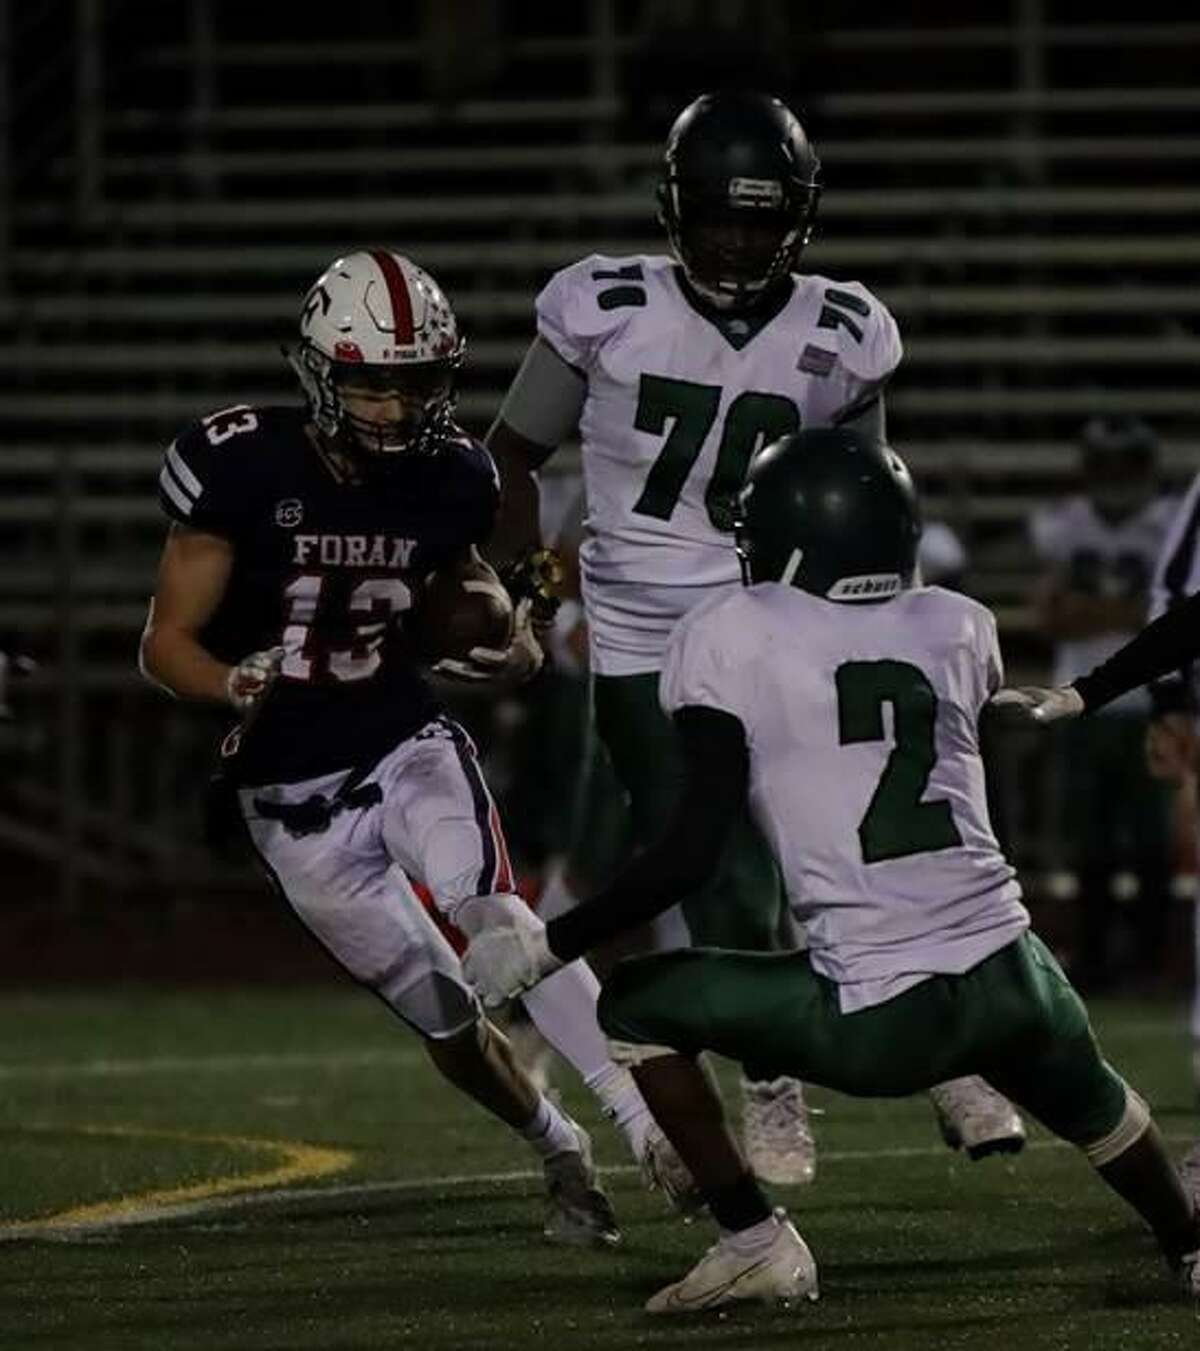 Foran's Dean Ross caught 4 passes for 95 yards, including a touchdown, in the Lions win over Bassick.